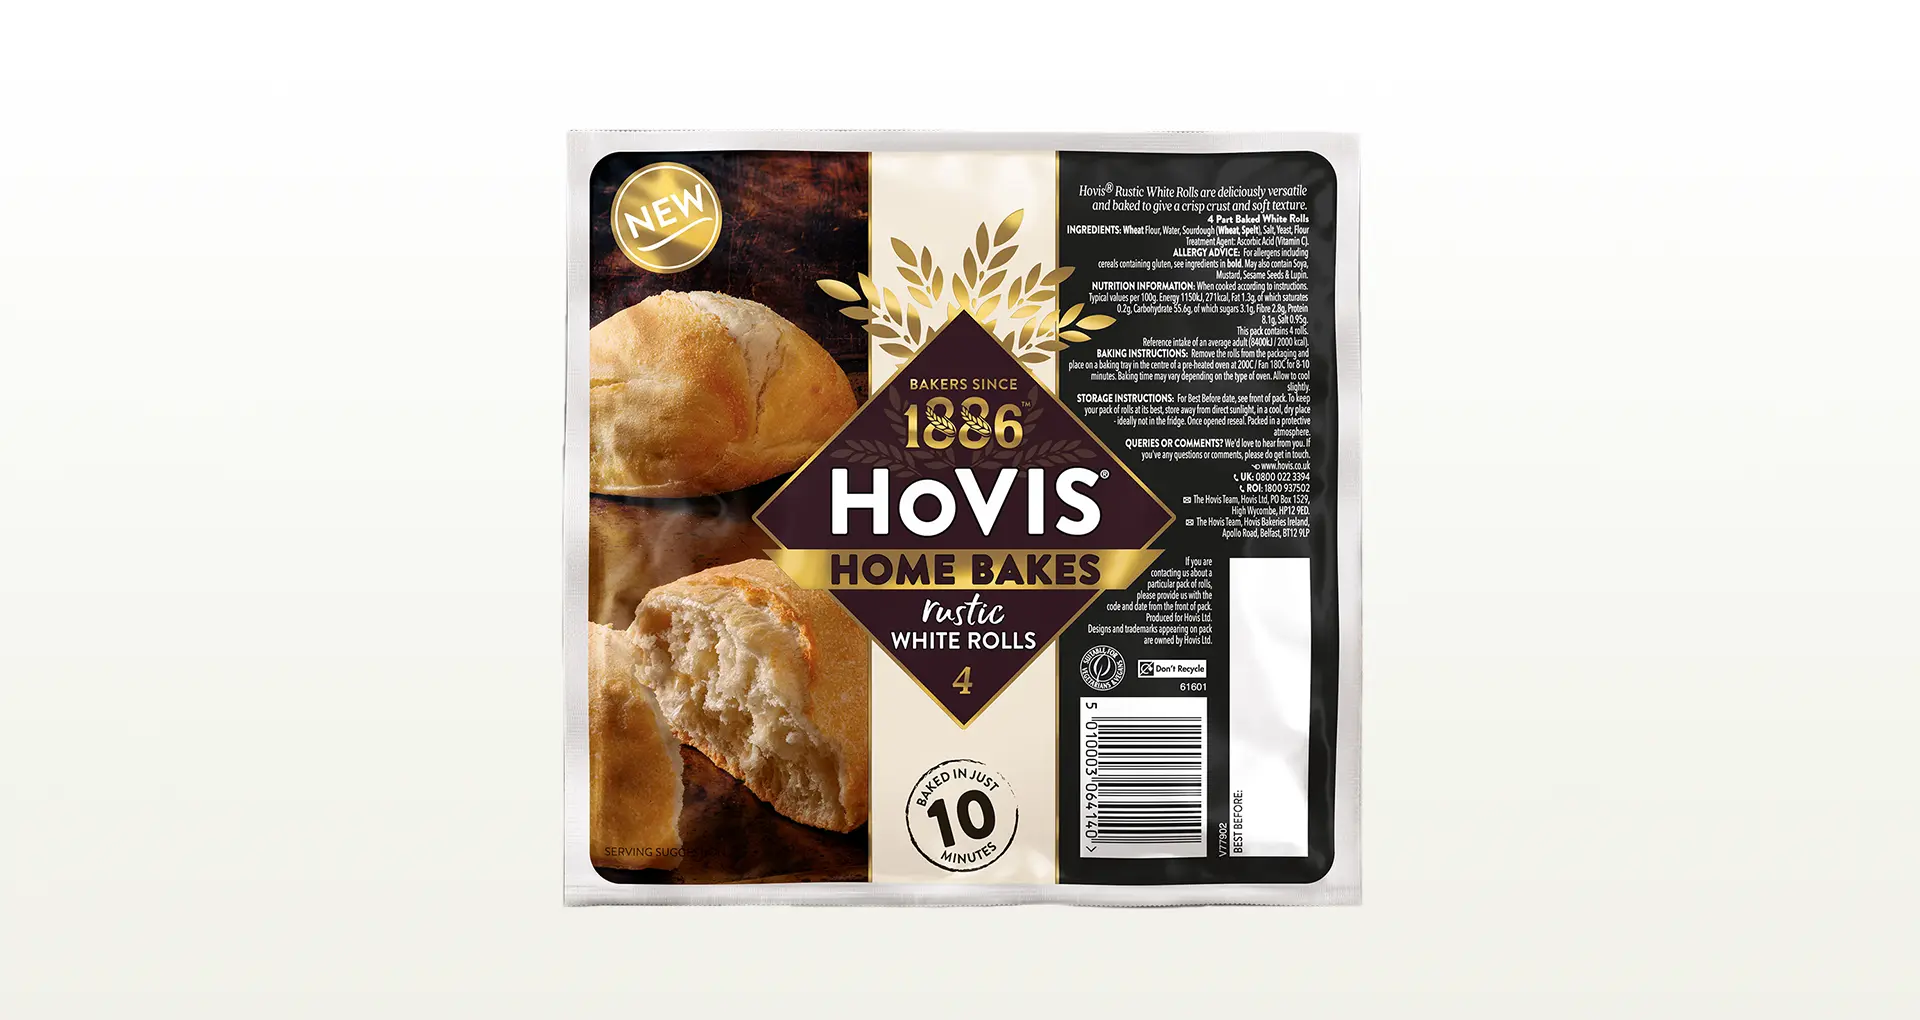 Hovis Home Bakes Rustic White Rolls